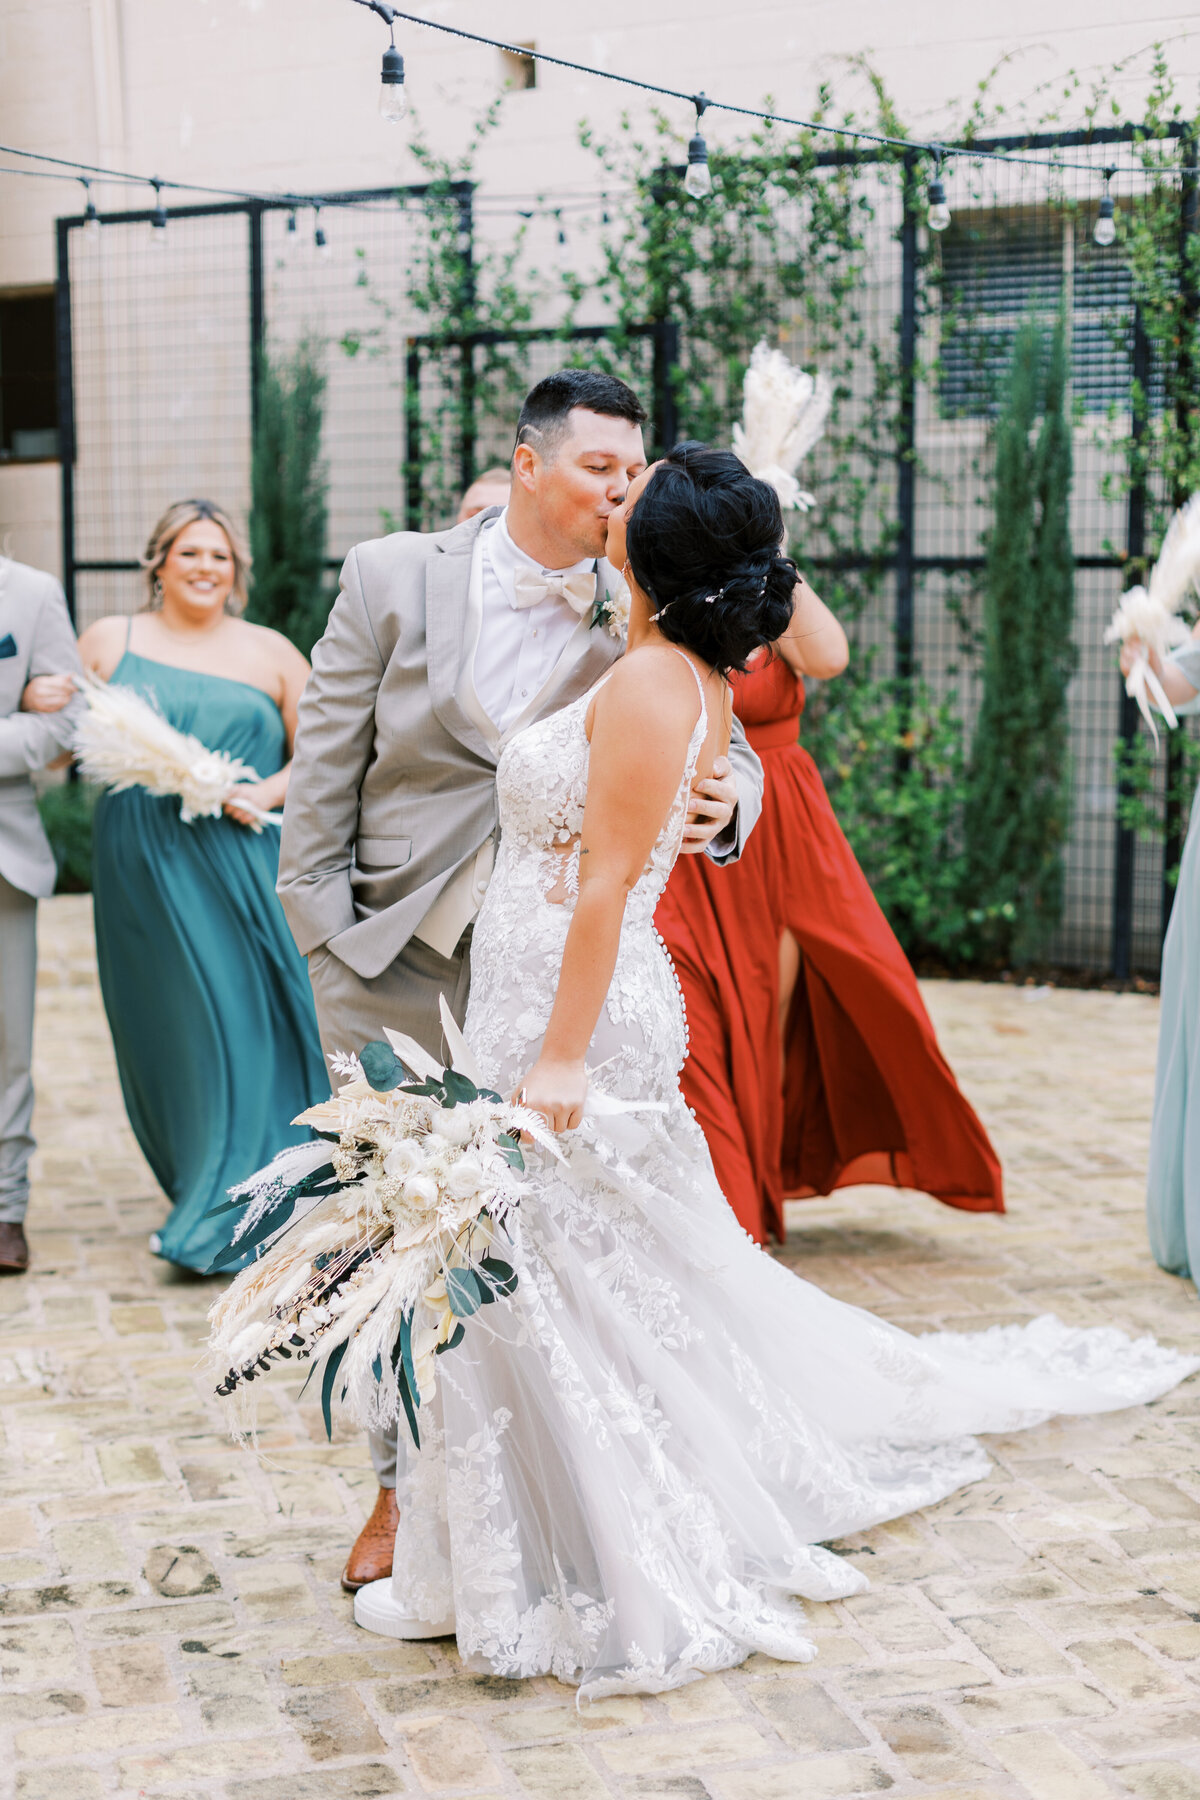 Ink & Willow Photography - Wedding Photographers Victoria TX - Lane & Celeste - Ink & Willow Photography - Wedding Photographers Victoria TX